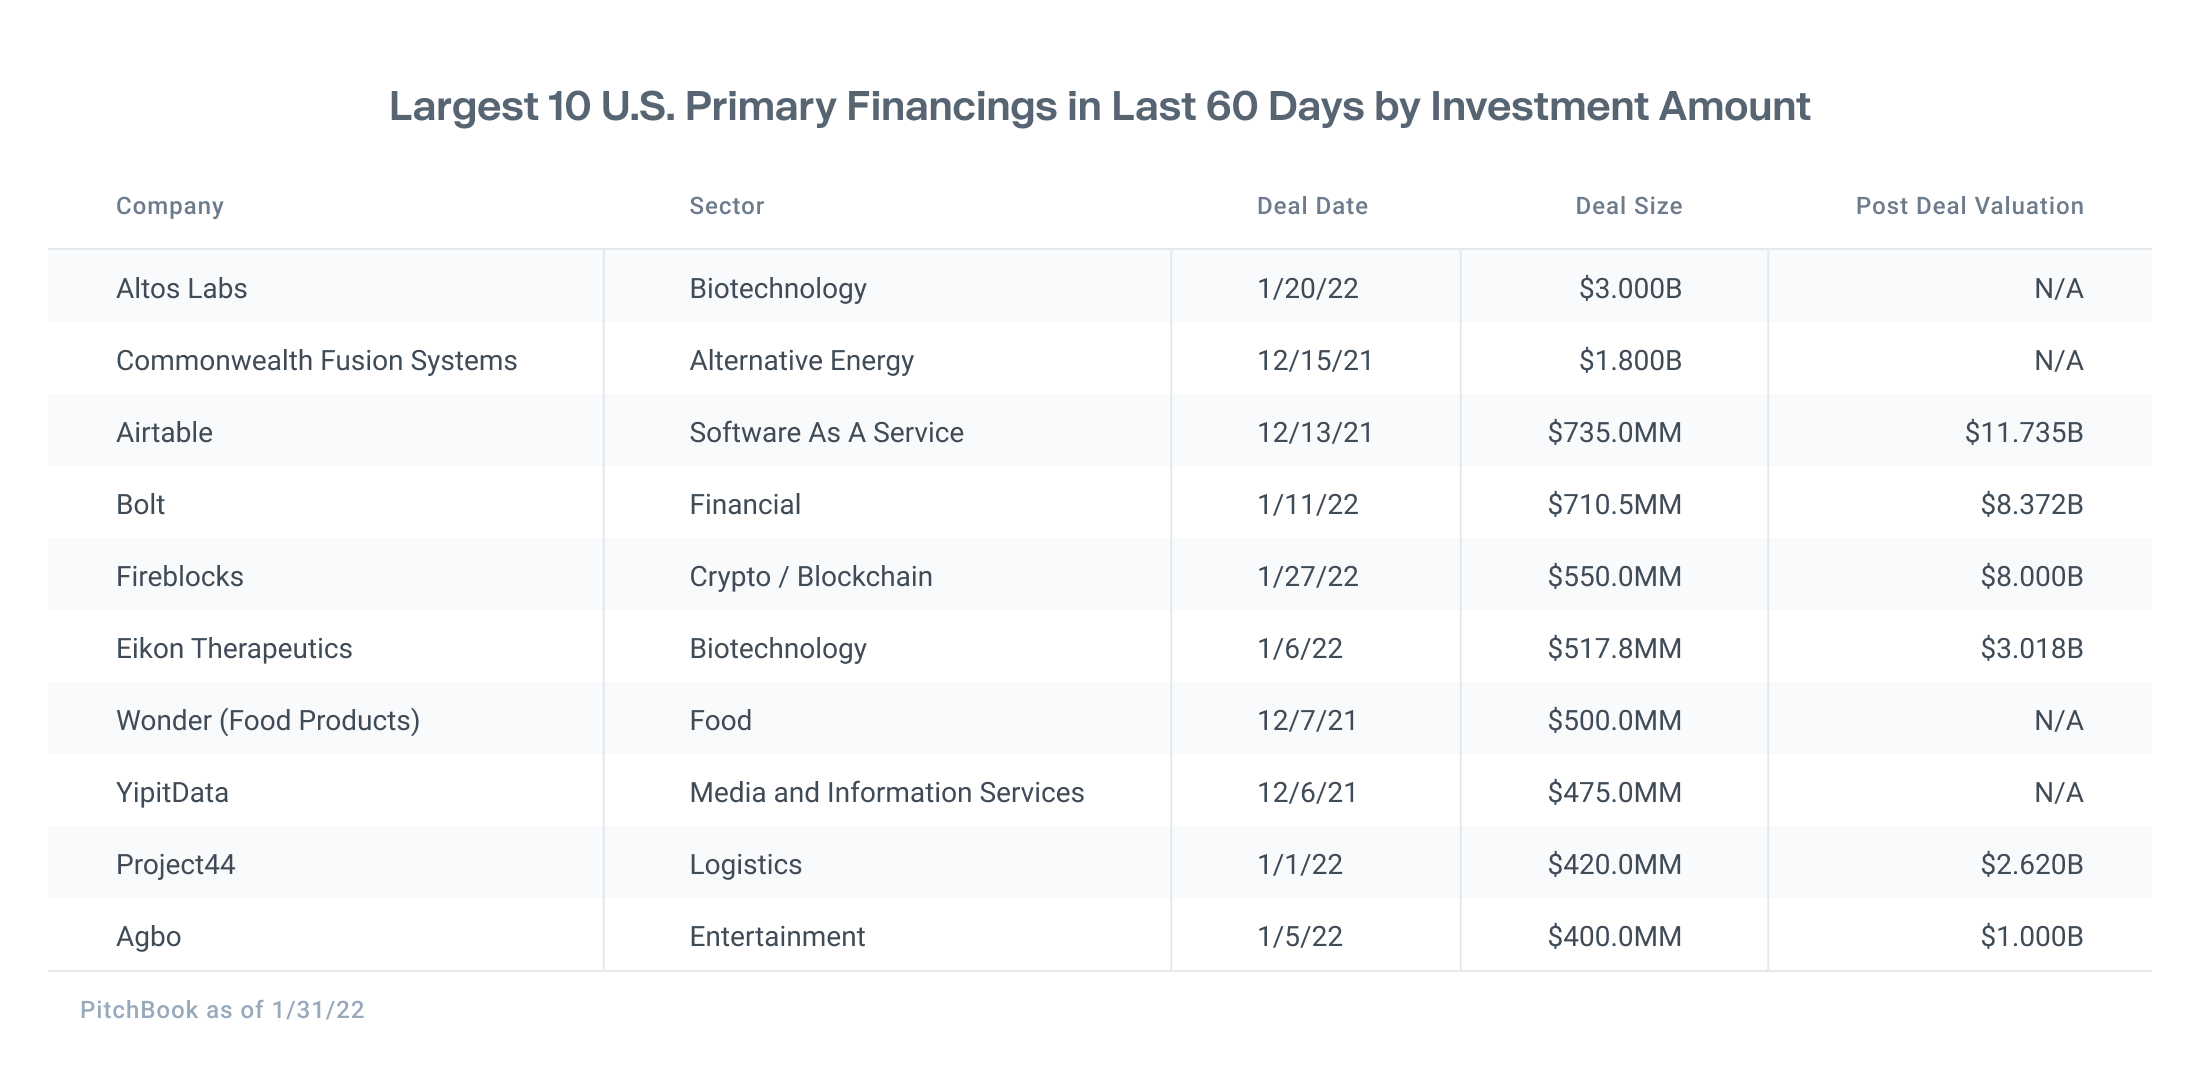 Largest 10 U.S. Primary Financings in Last 60 Days by Investment Amount